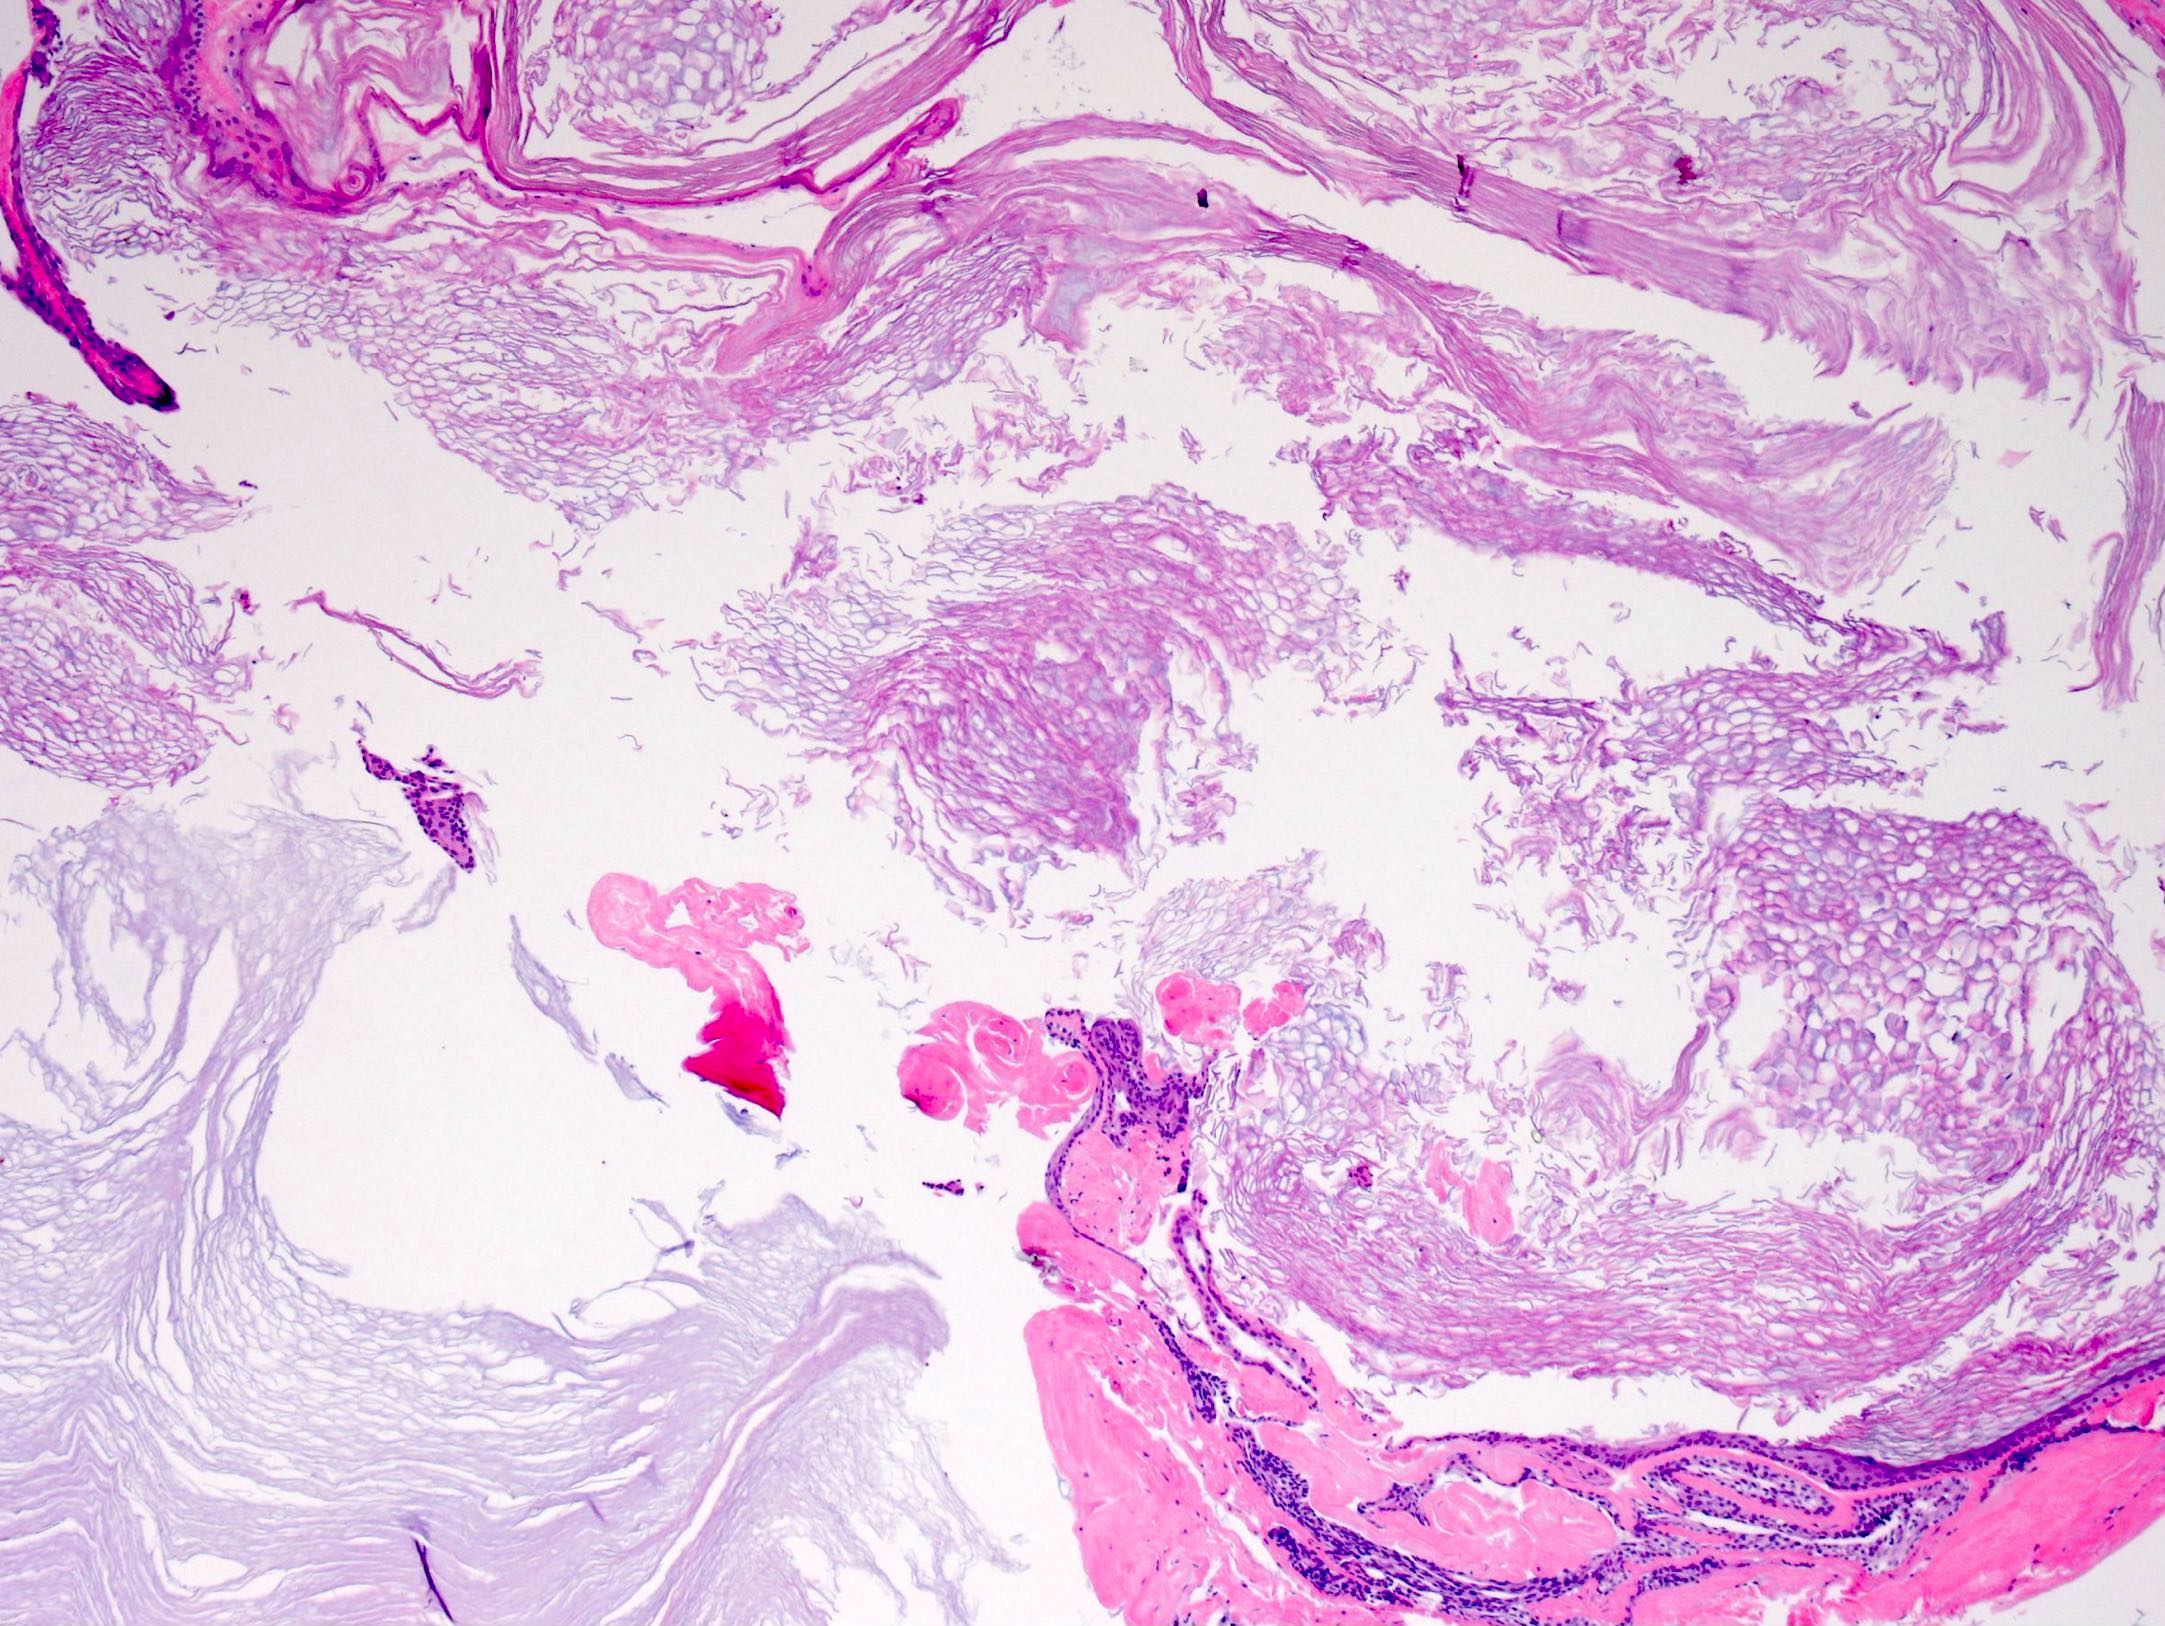 epidermoid cyst pathology outlines